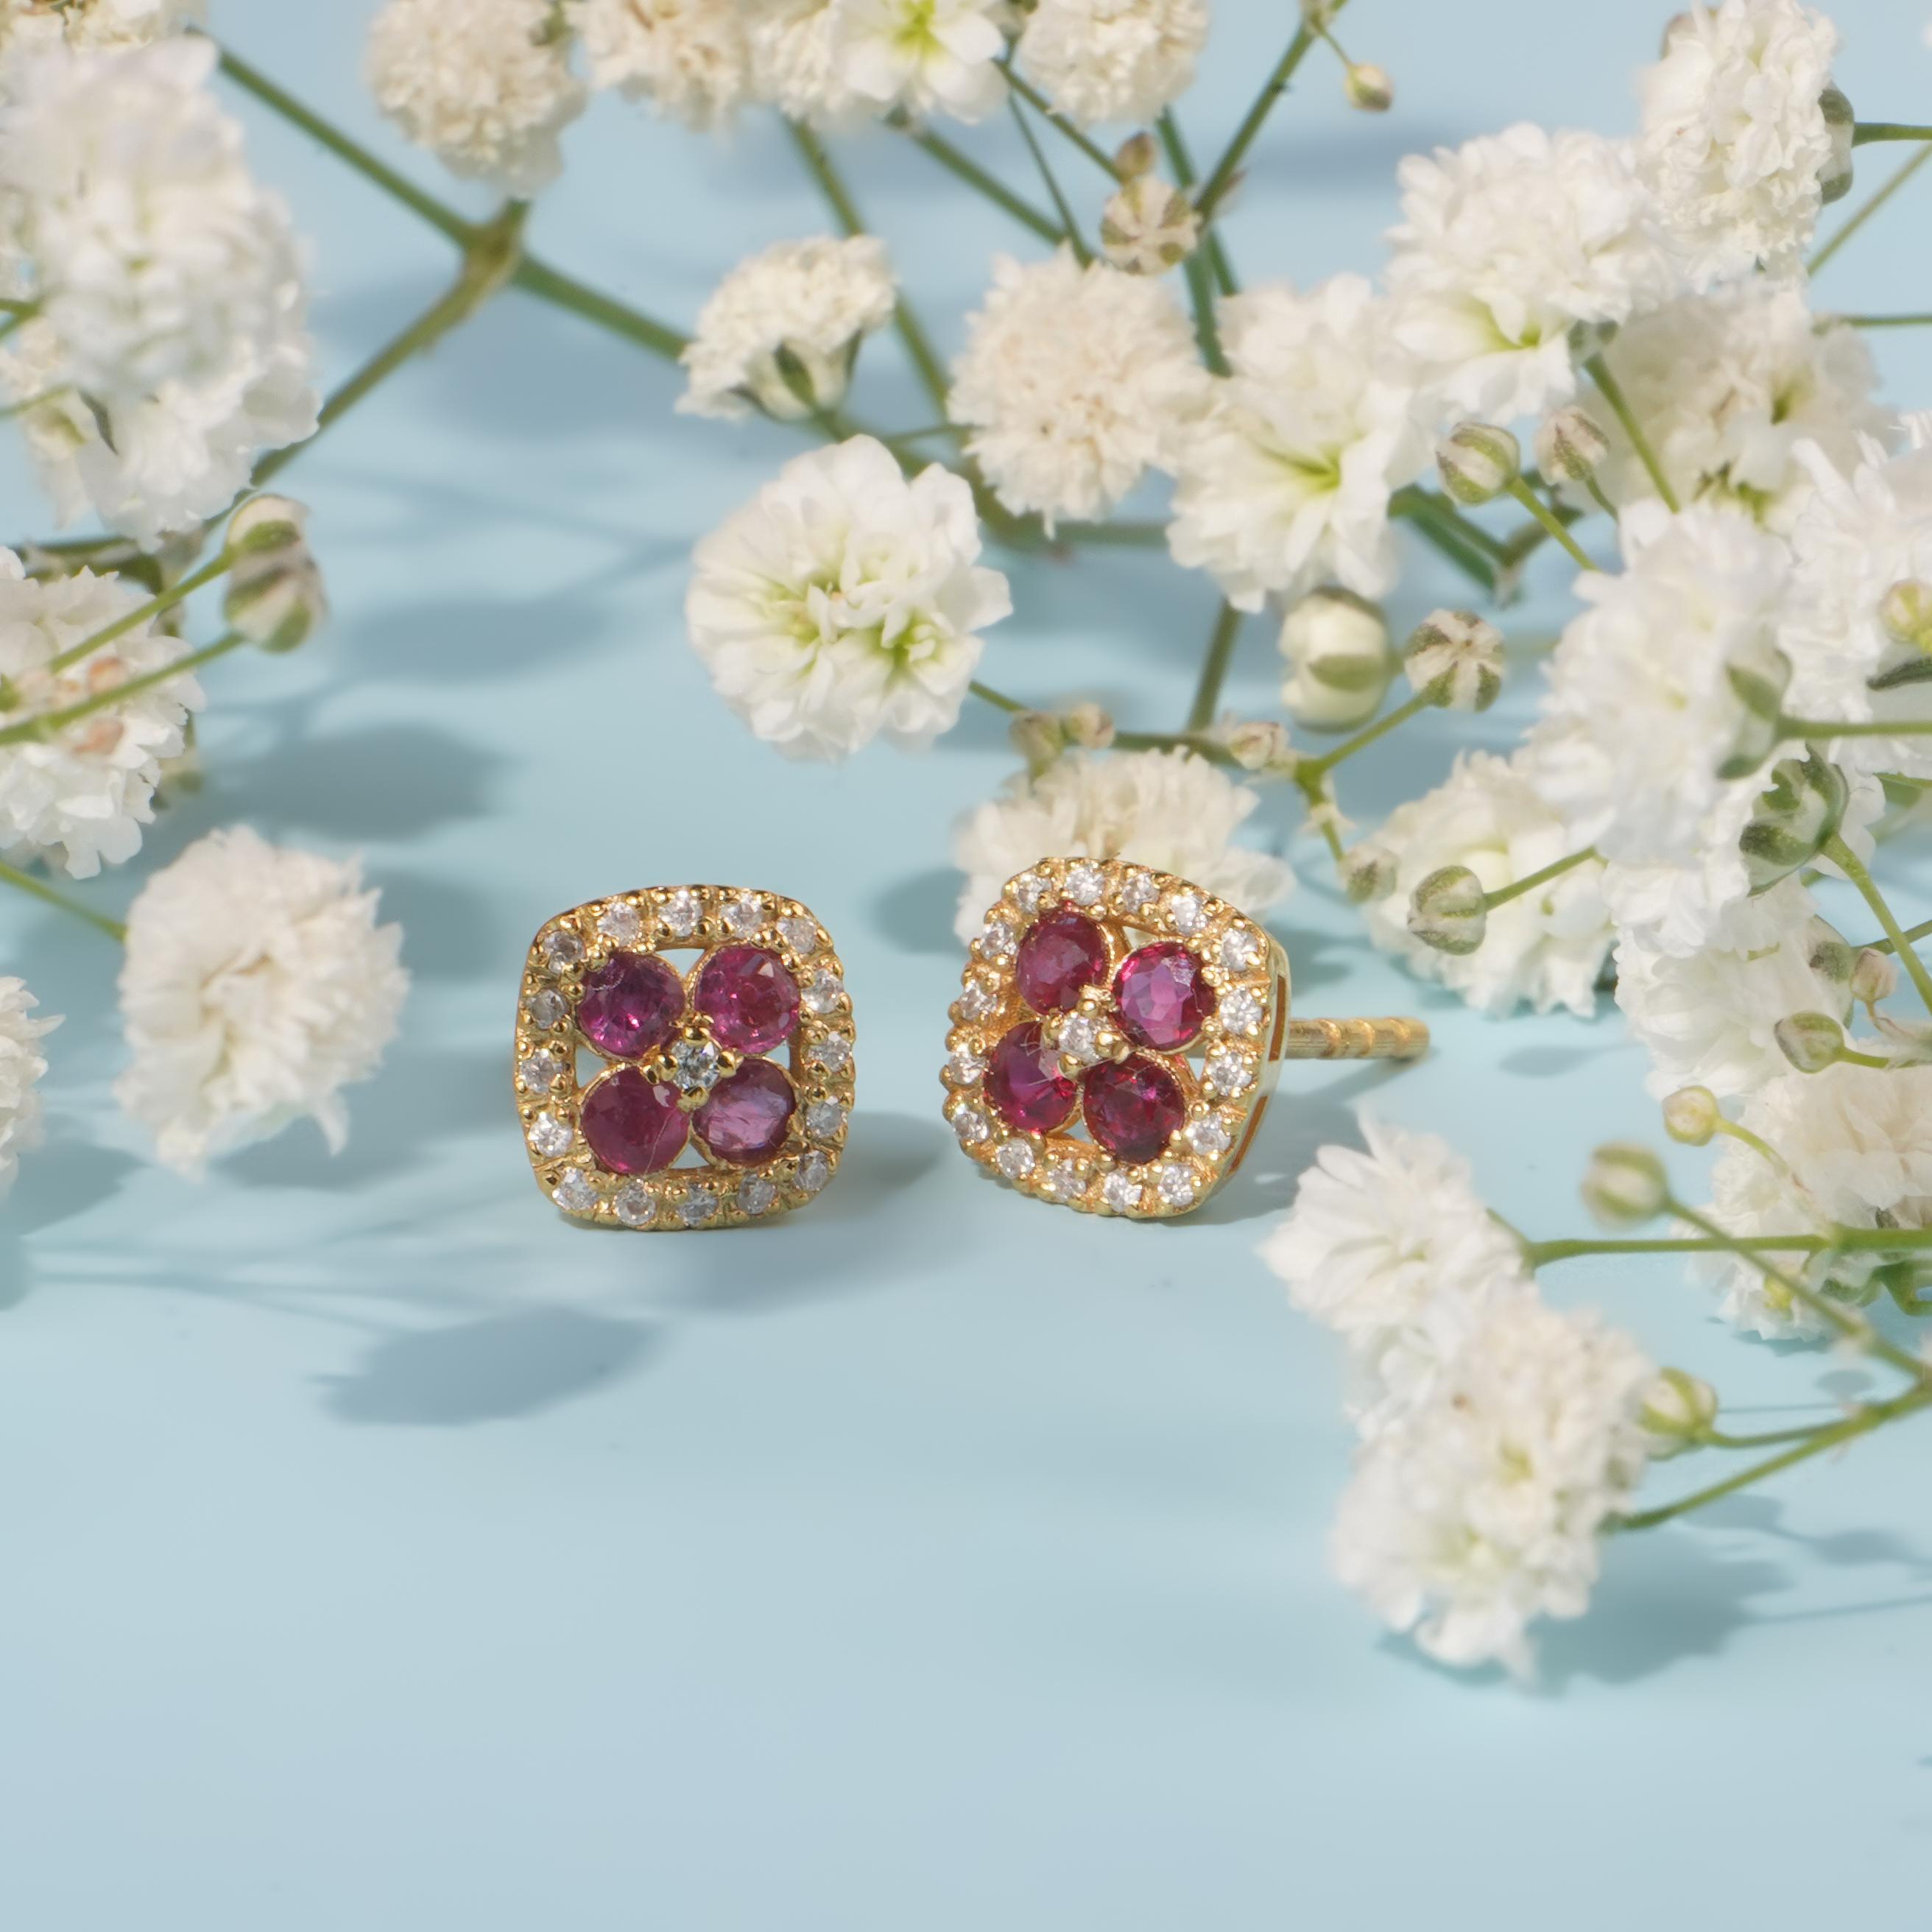 Are you looking for a unique and elegant gift for yourself or someone special? Do you want to add some sparkle and color to your everyday look? If so, you will love our clover ruby earrings!

These earrings are made of 18k solid gold and feature